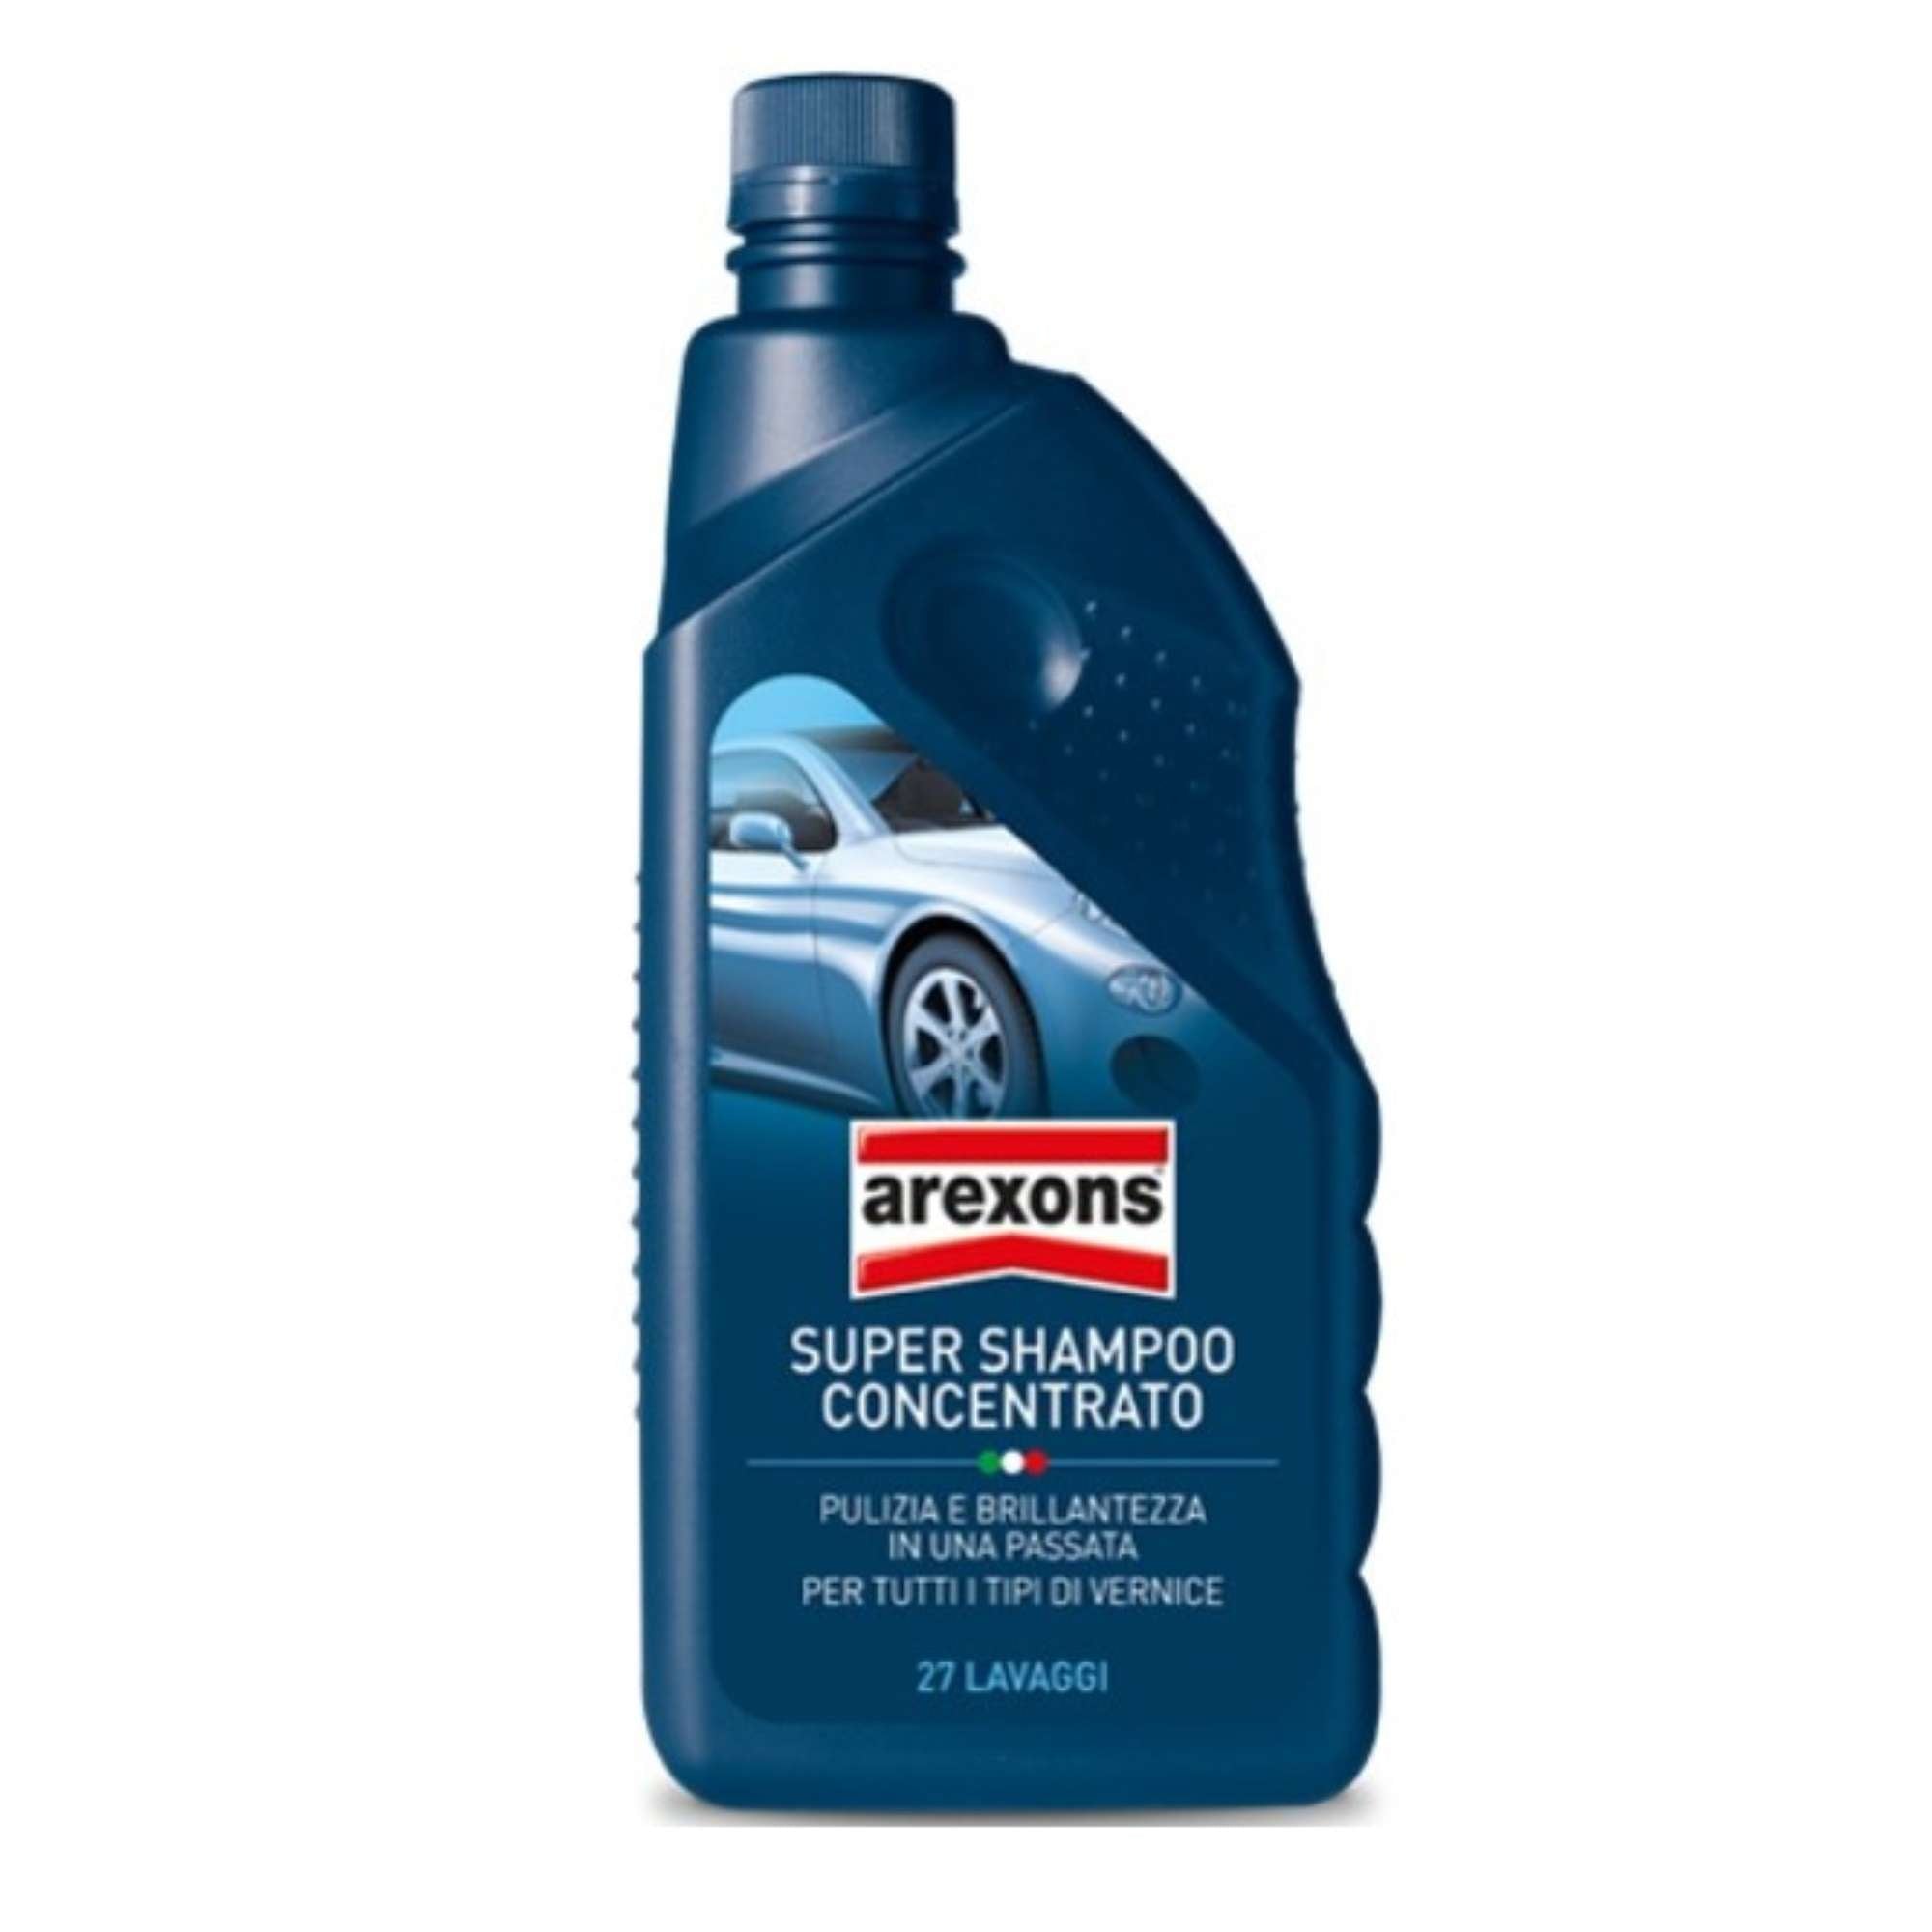 Supershampoo Concentrate 1liter - Arexons 8345